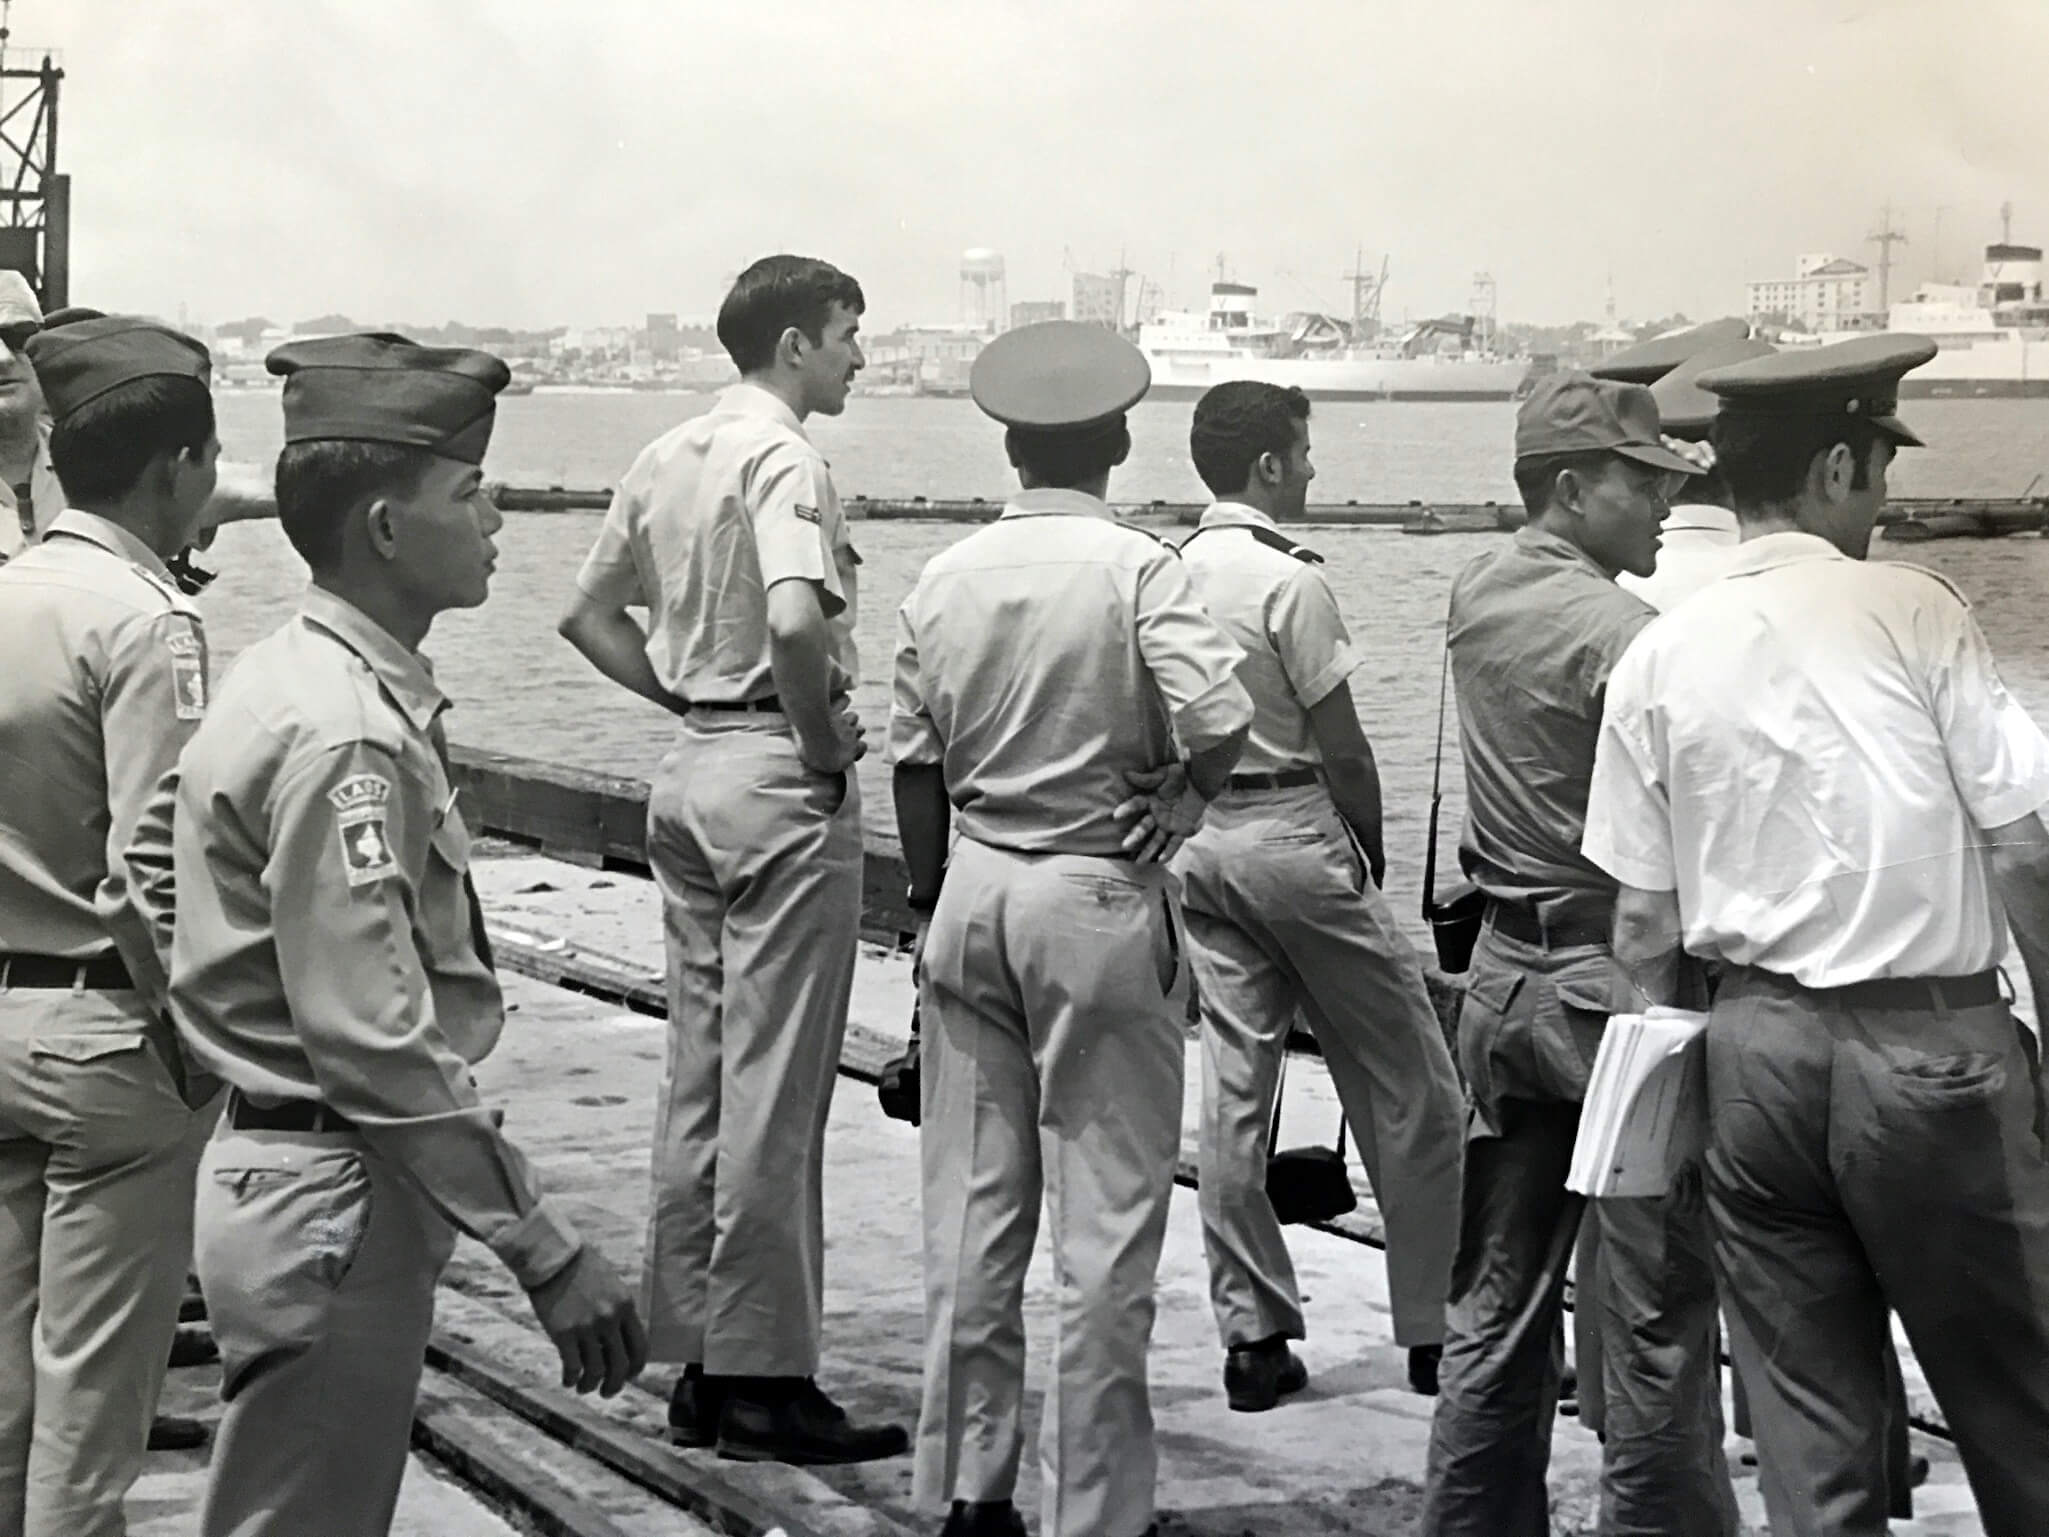 Group of Air Force soldiers standing on a ship or dock, looking out over the water.